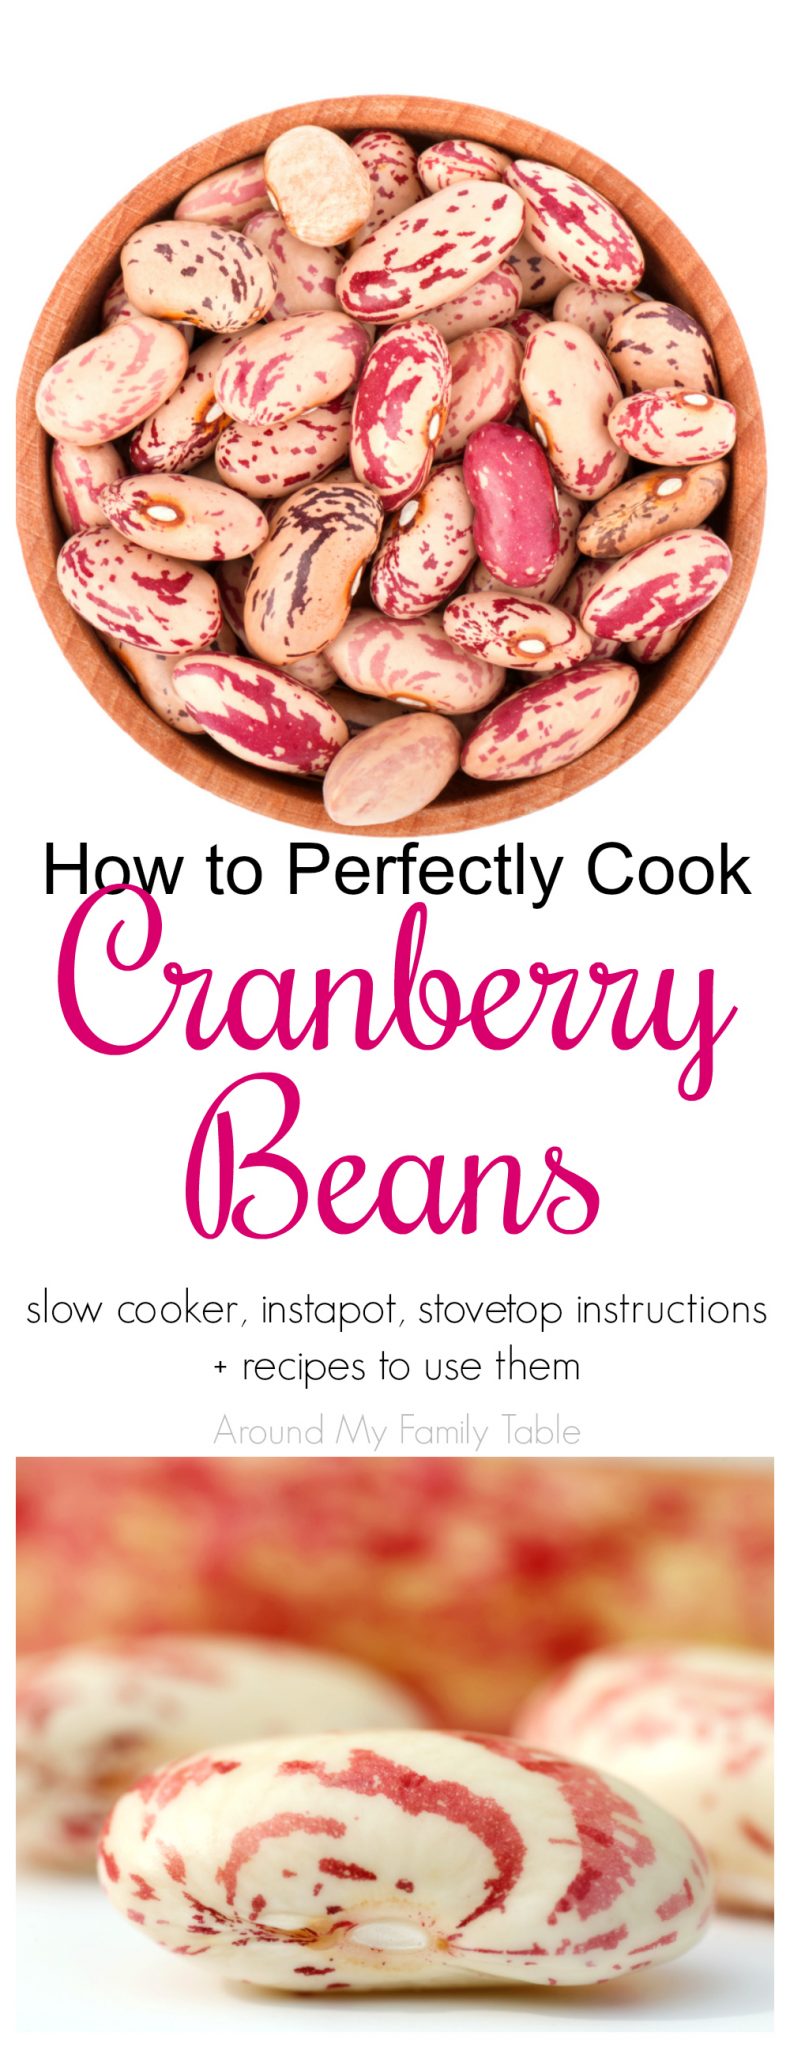 Everything you've wanted to know about Cranberry Beans. This How to Cook: Cranberry Beans guide features instructions on using a slow cooker, pressure cooker, instantpot, and stovetop for cooking cranberry beans plus there are a few delicious recipes to try as well.